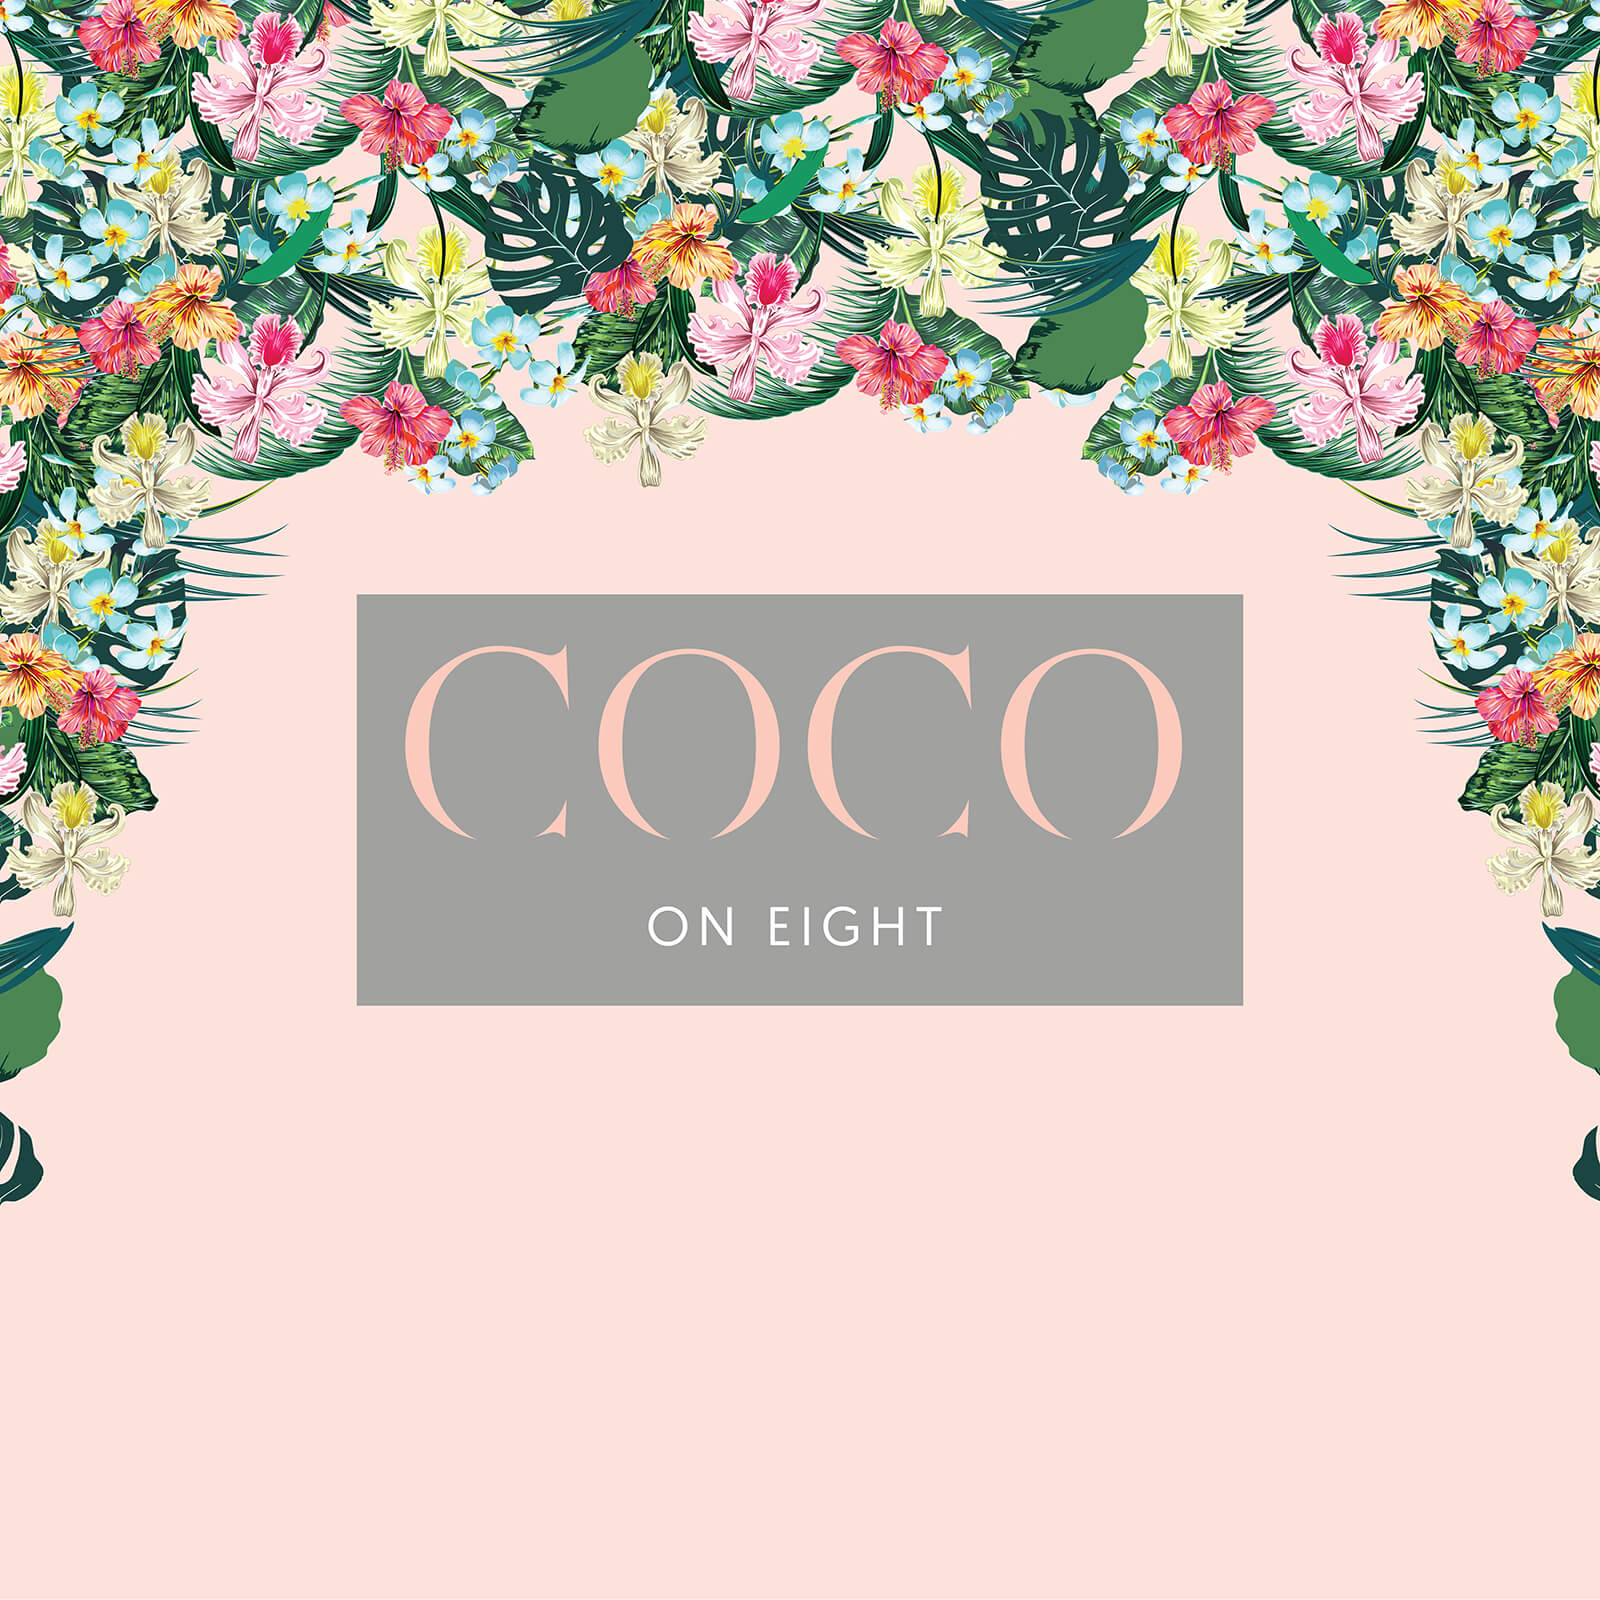 COCO ON EIGHT